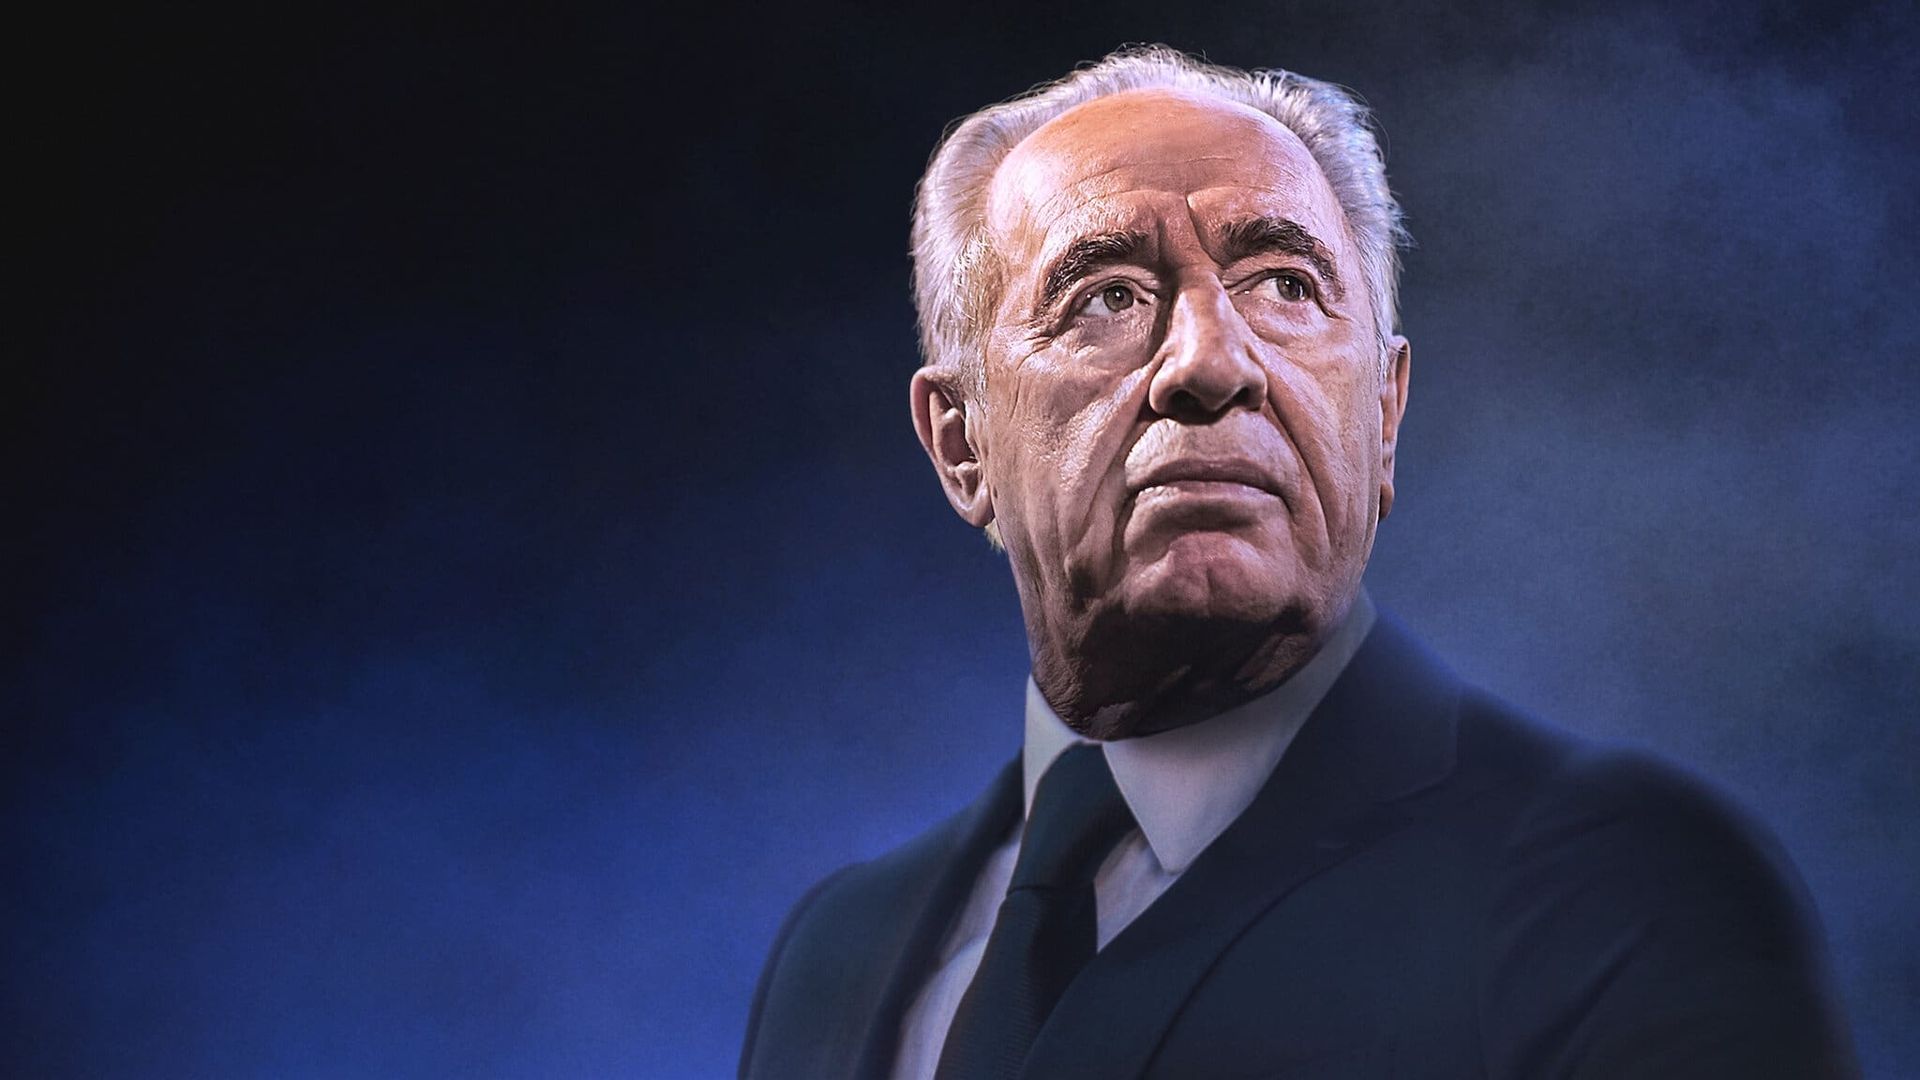 Never Stop Dreaming: The Life and Legacy of Shimon Peres background